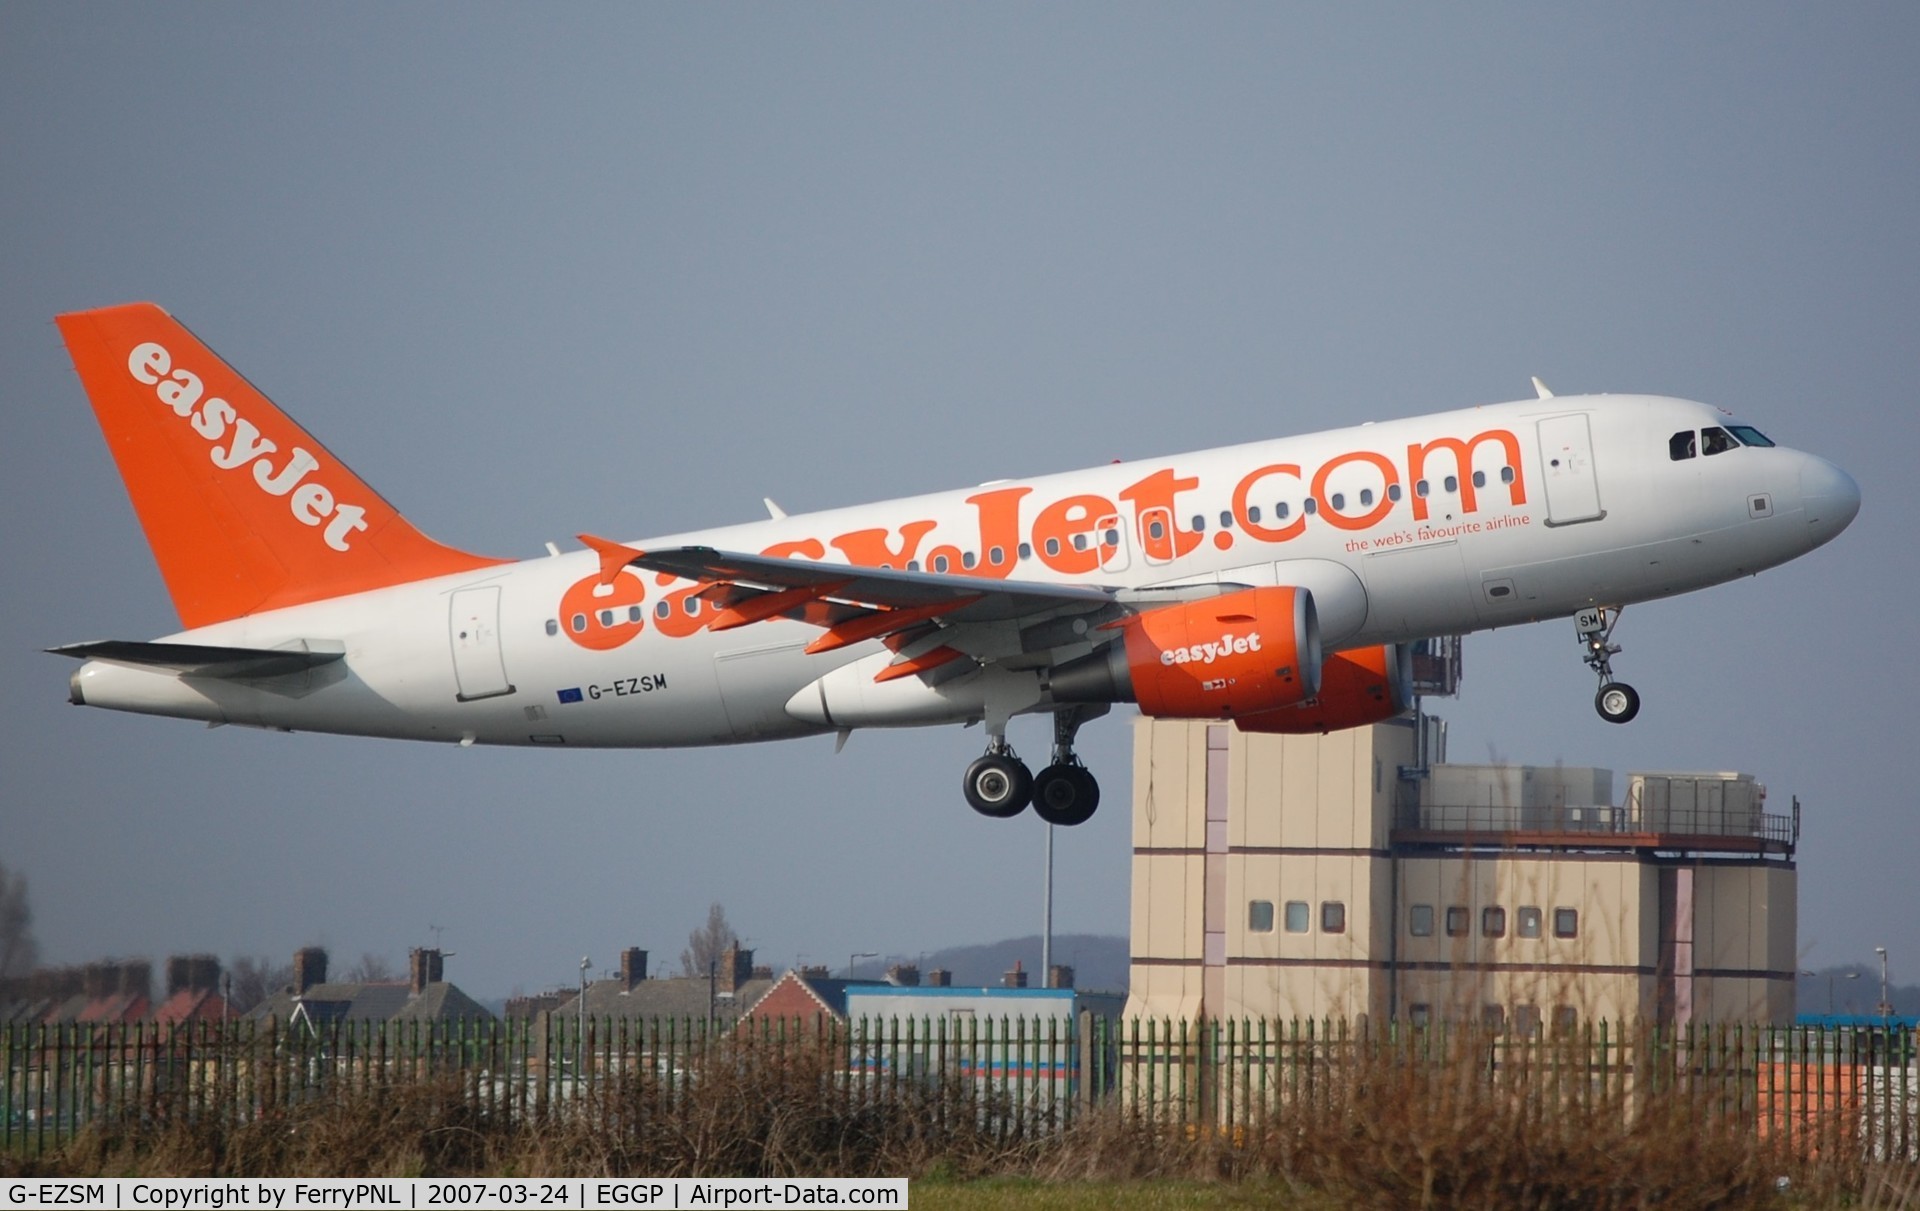 G-EZSM, 2003 Airbus A319-111 C/N 2062, Easyjet A319 taking-off from LPL